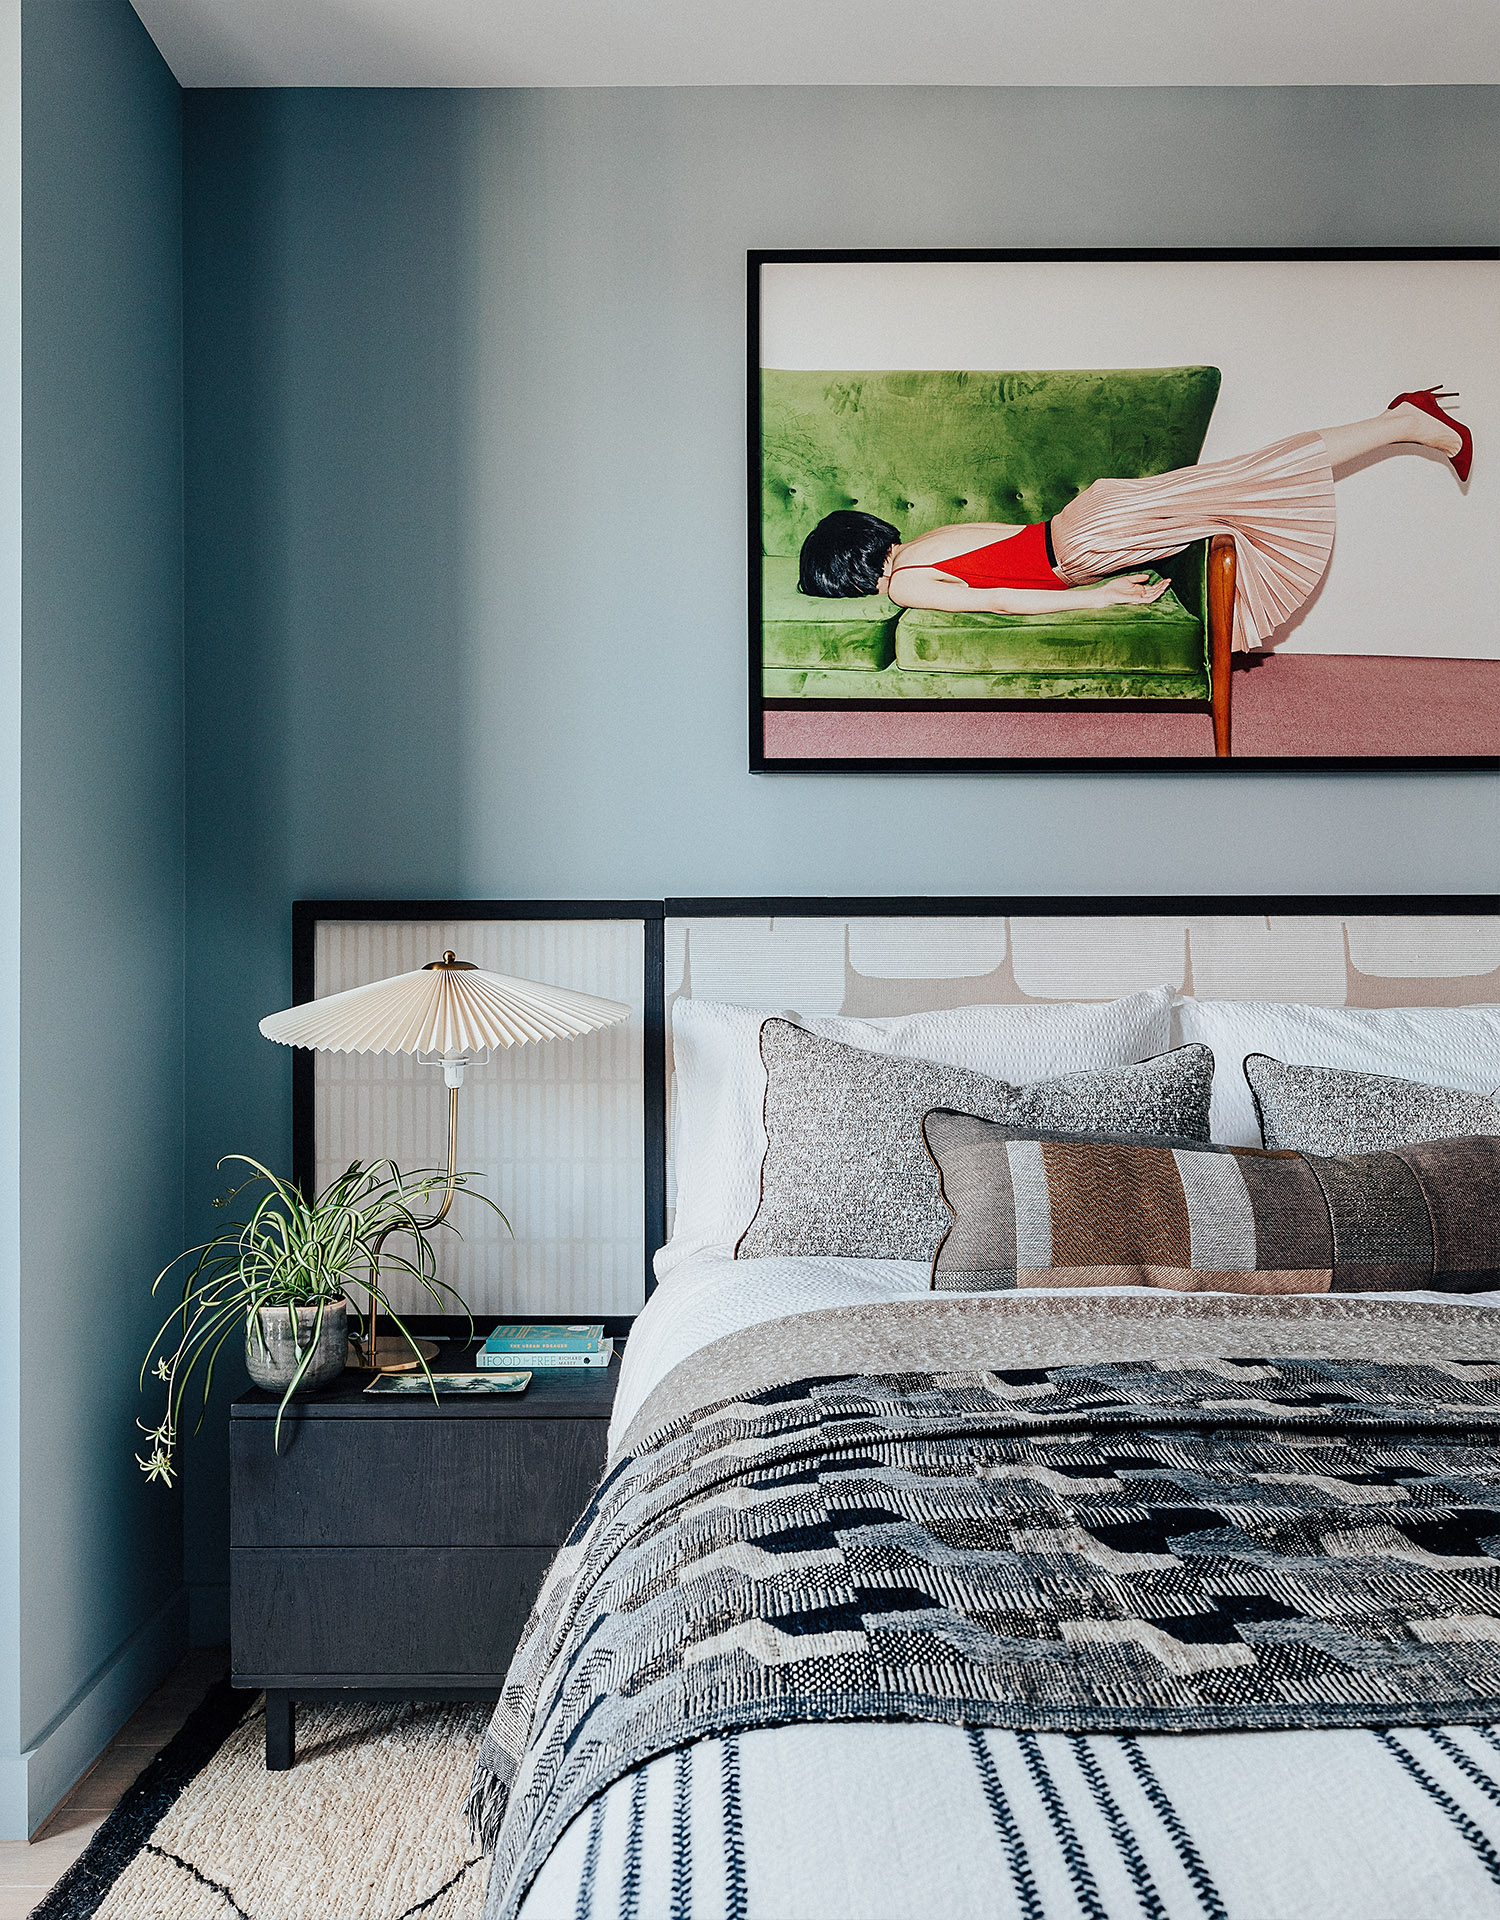 Triptych Bankside | Bedroom | Angel O'Donnell | South Bank